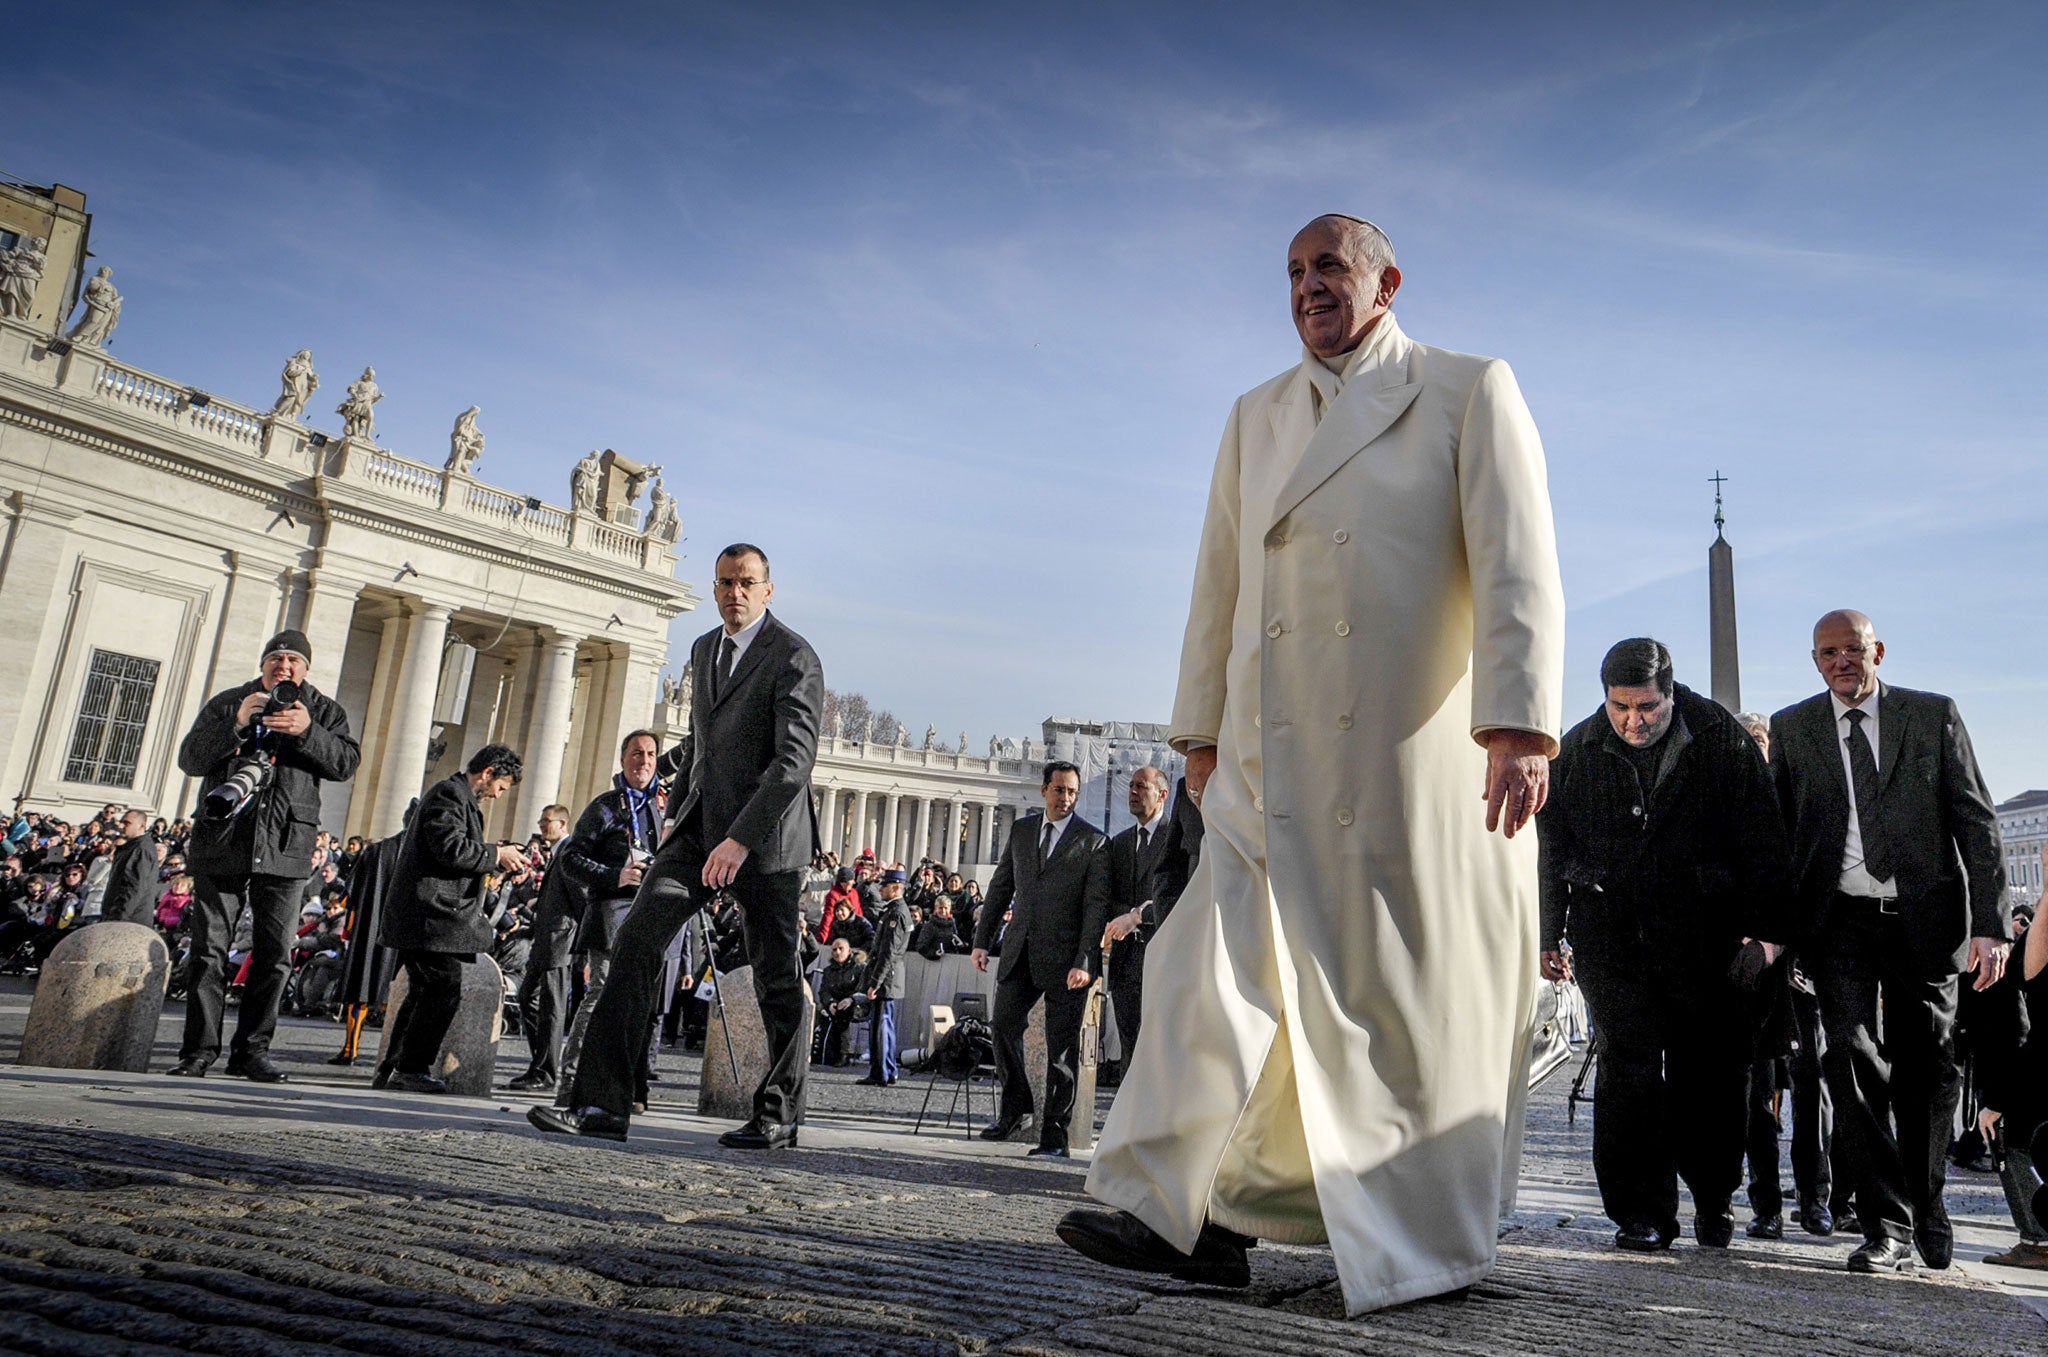 Pope Francis at the weekly papal audience in Rome, January 2014